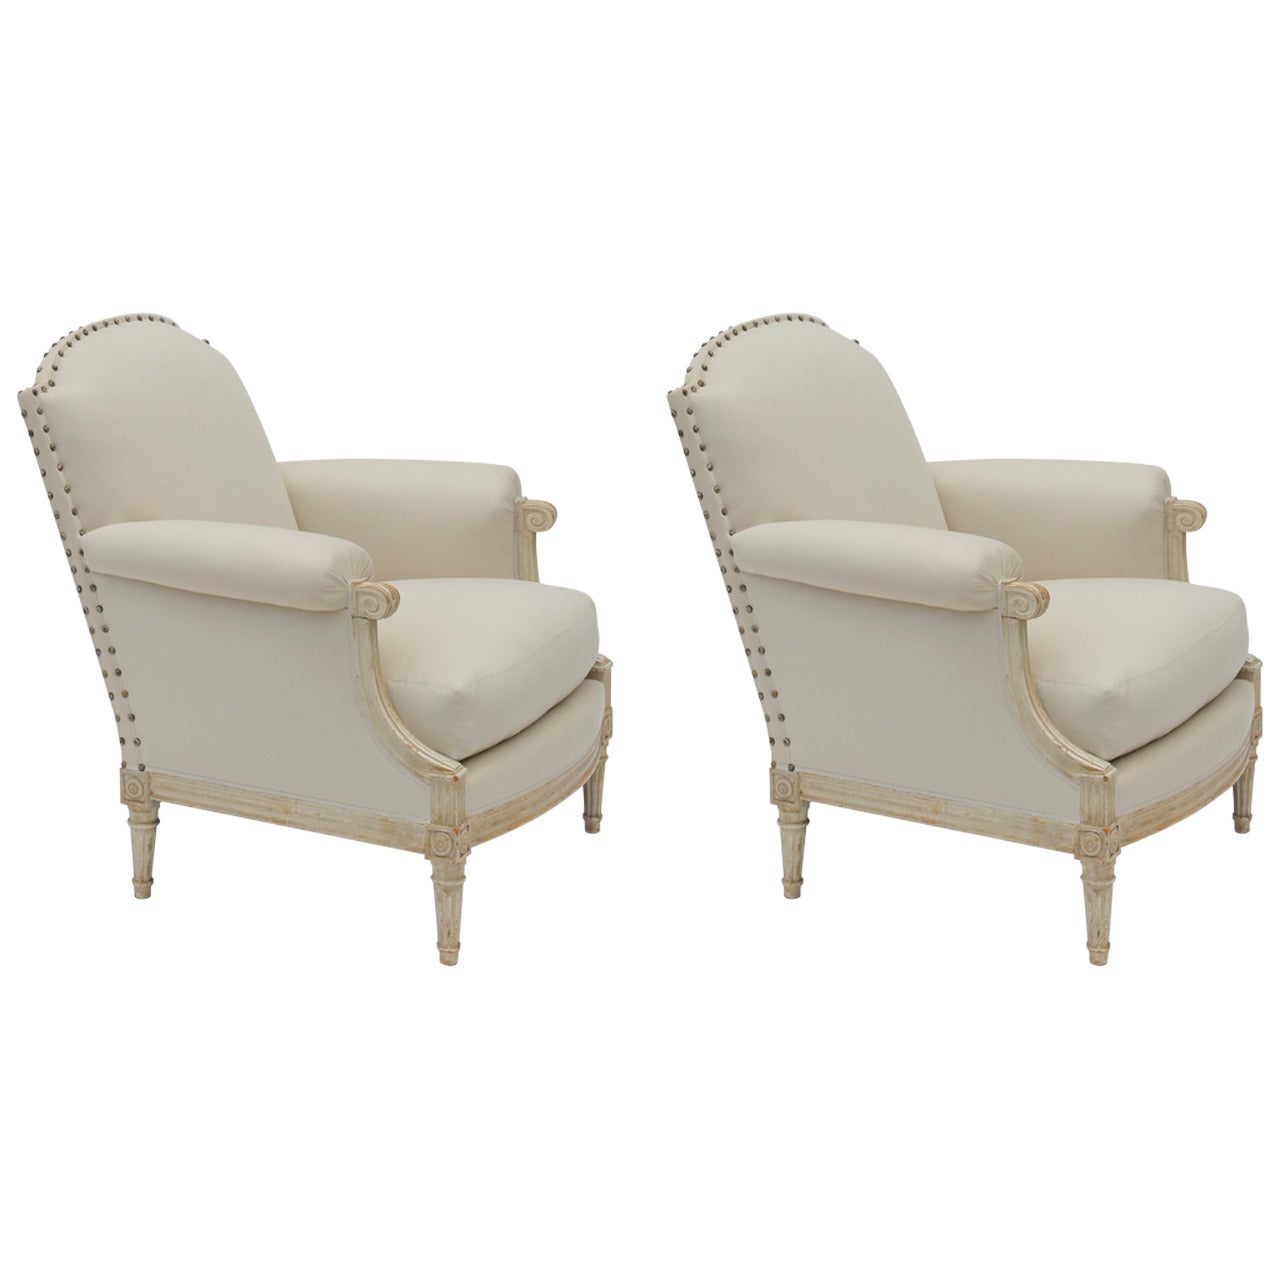 Pair of Exceptional Louis XVI Style Bergeres by Maison Jansen